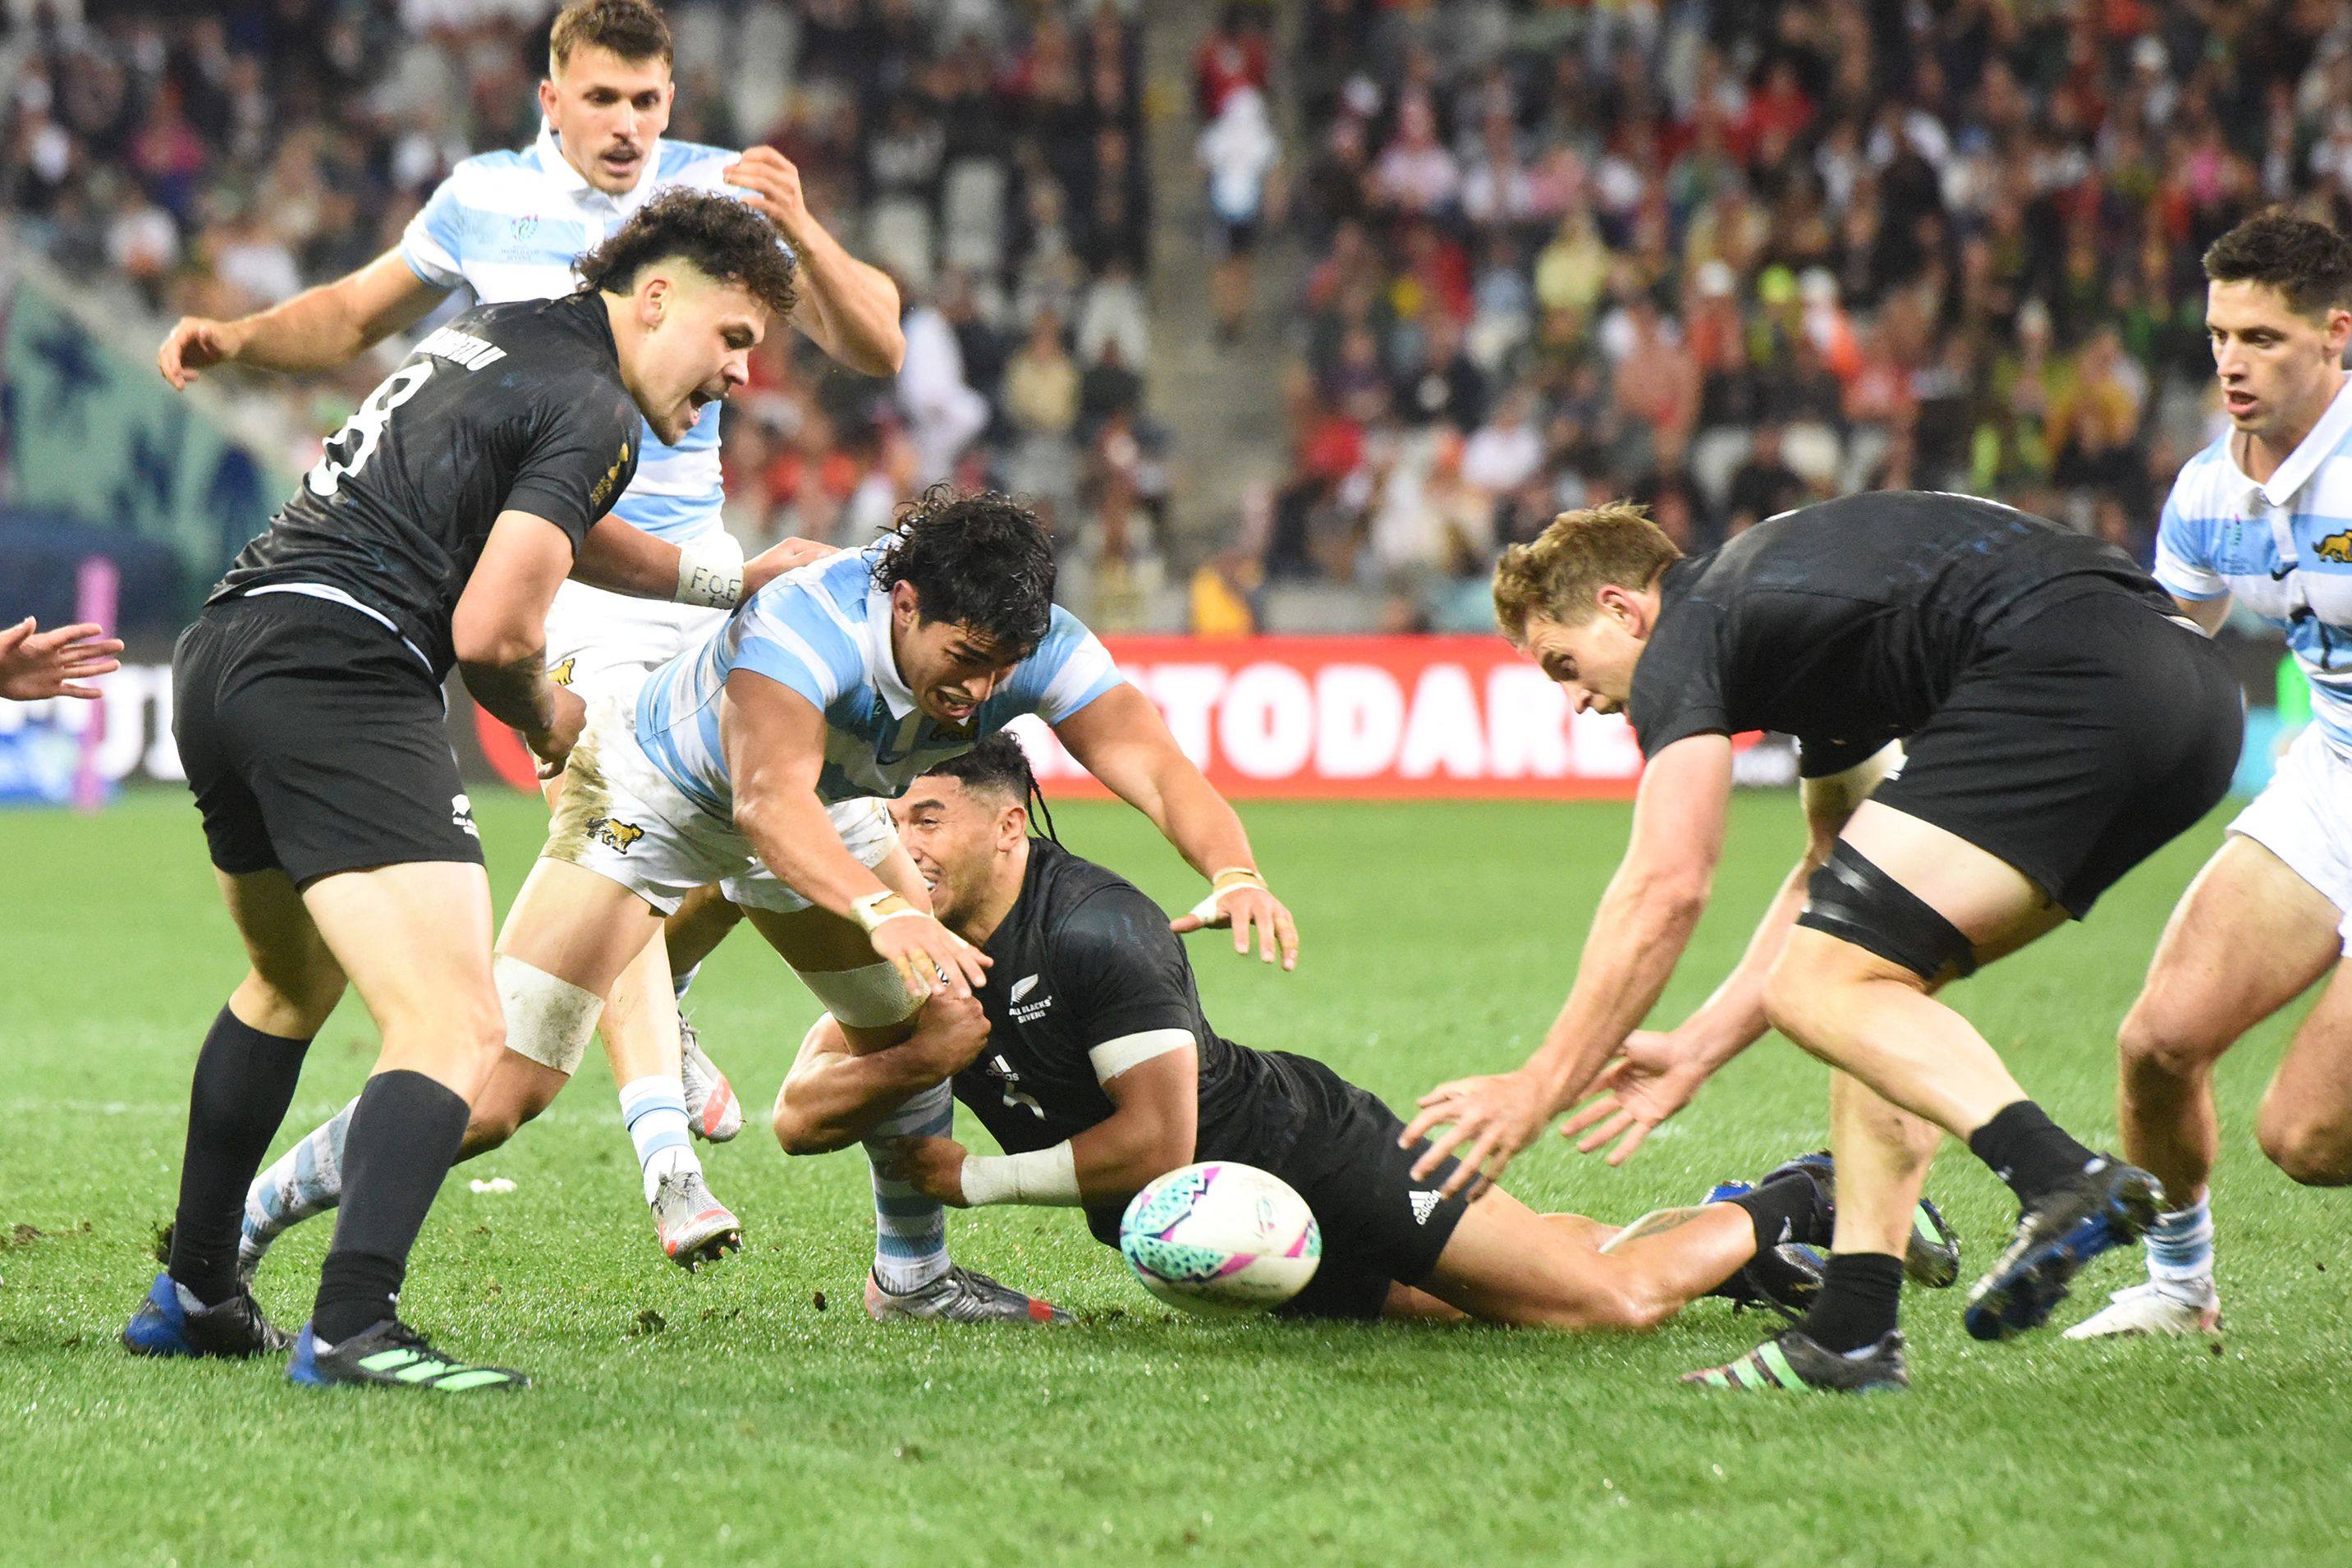 New Zealand’s Ngarohi McGarvey-Black tackles an Argentinian player at the Rugby World Cup Sevens. Photo: AFP